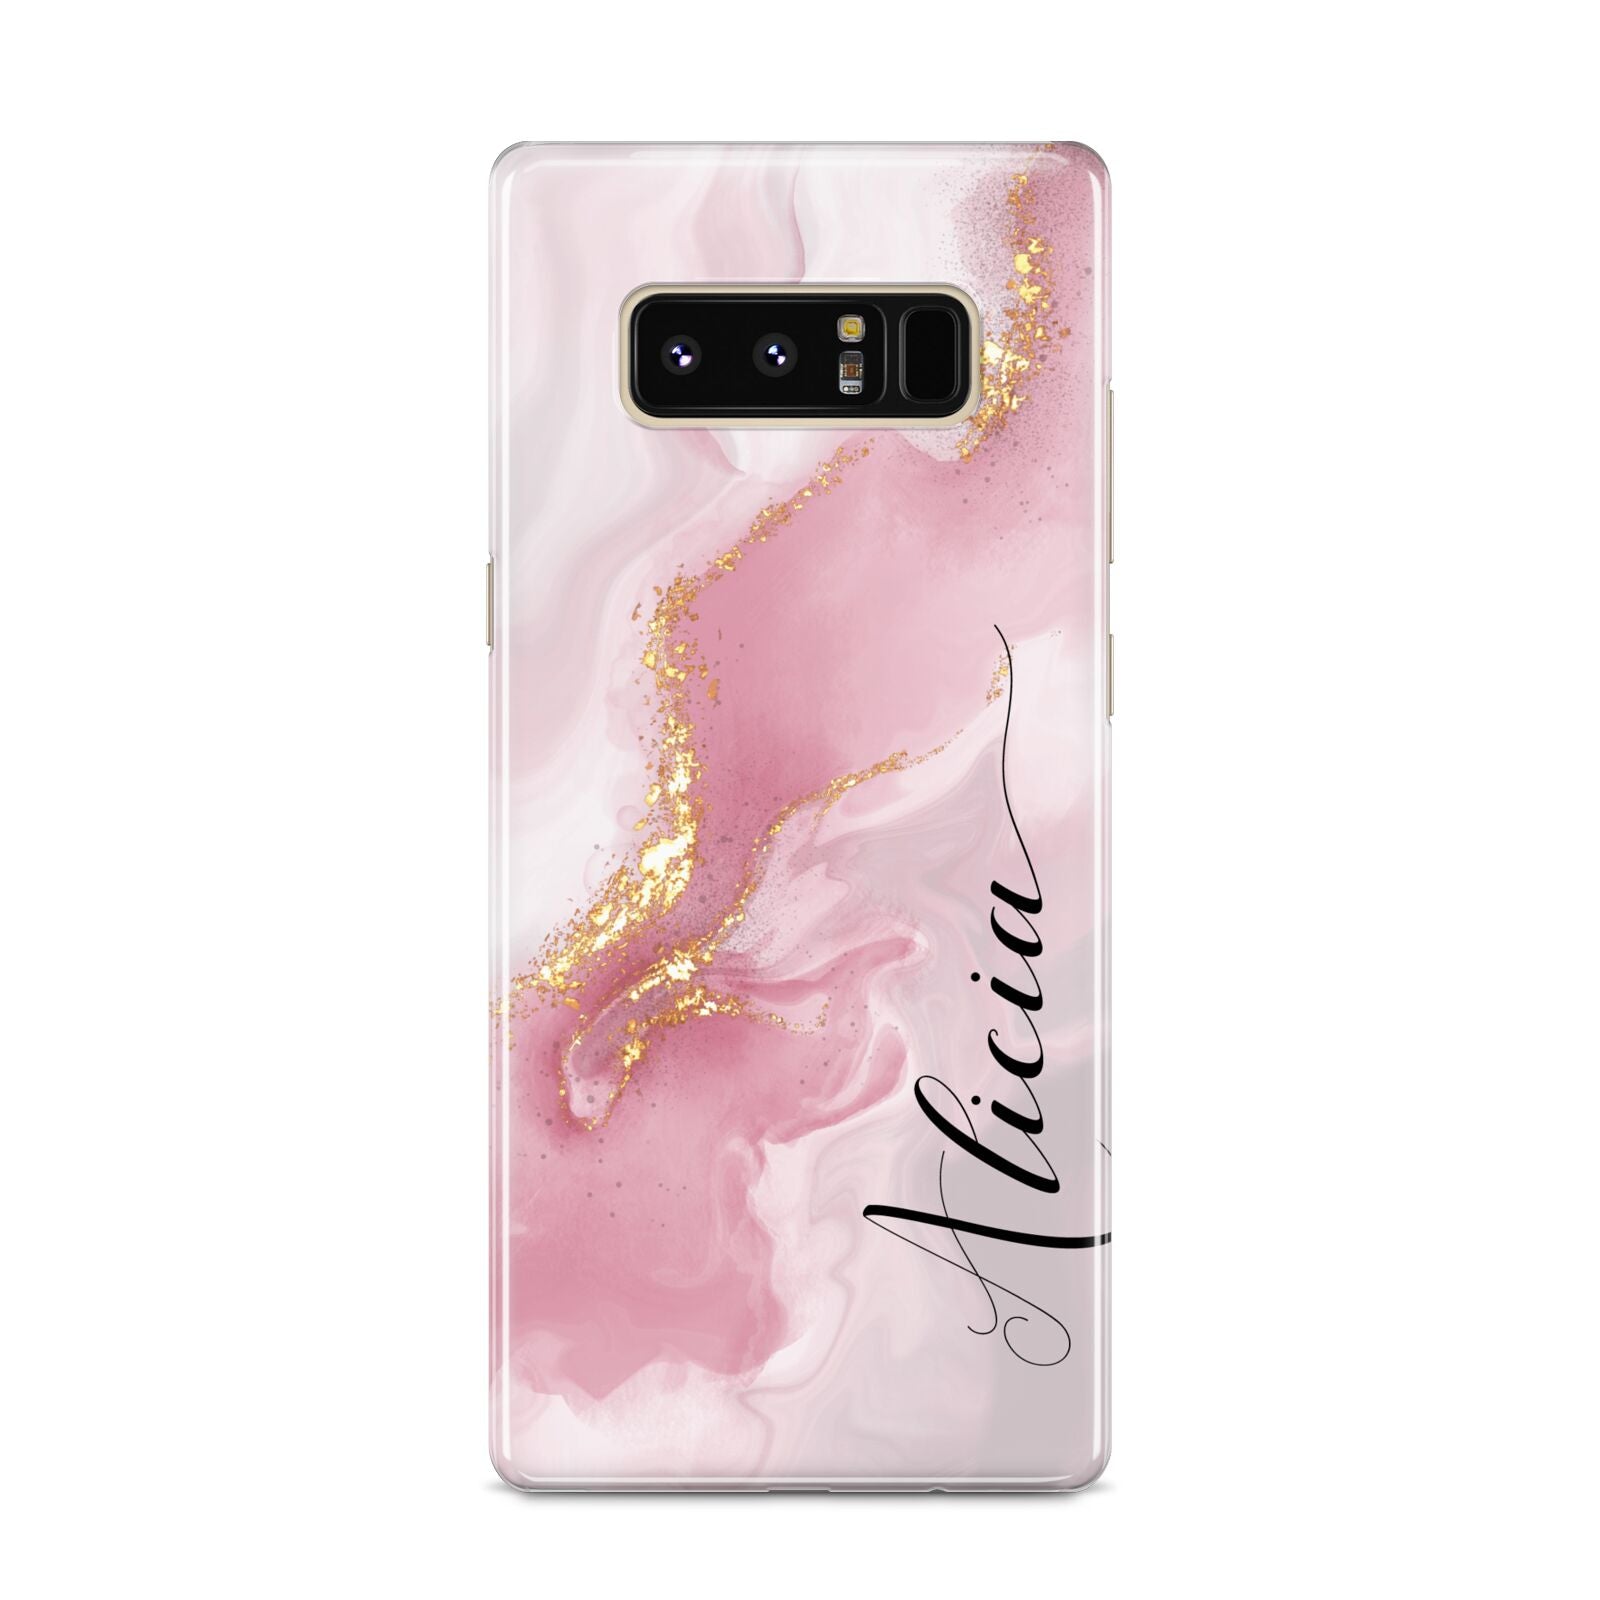 Personalised Pink Marble Samsung Galaxy S8 Case